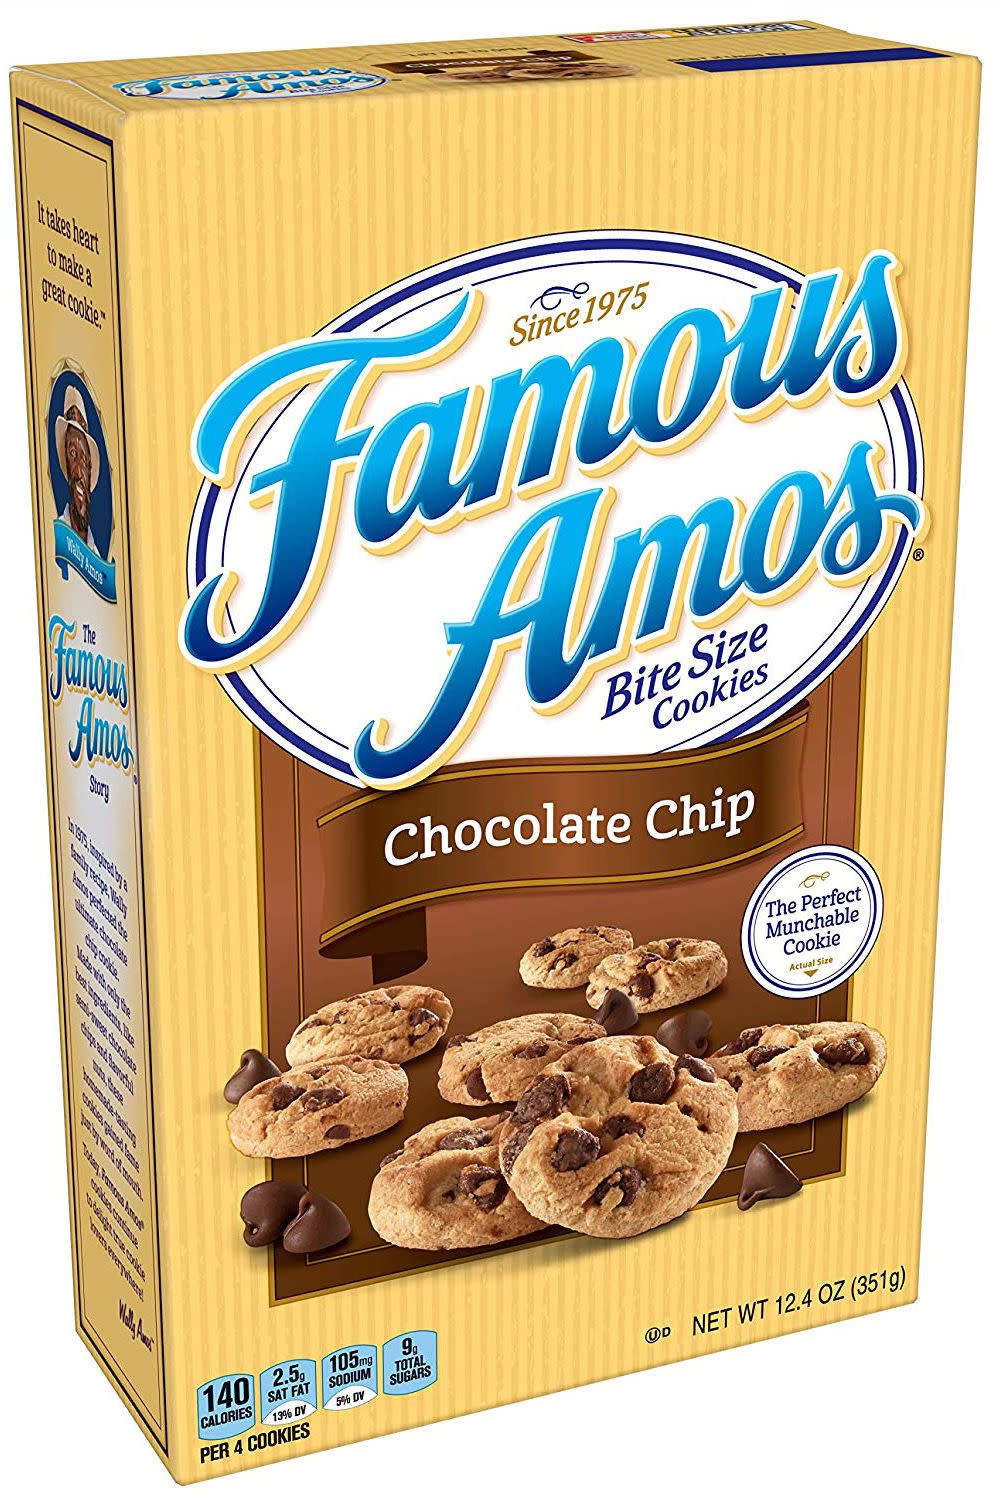 famous amos chocolate chip cookies